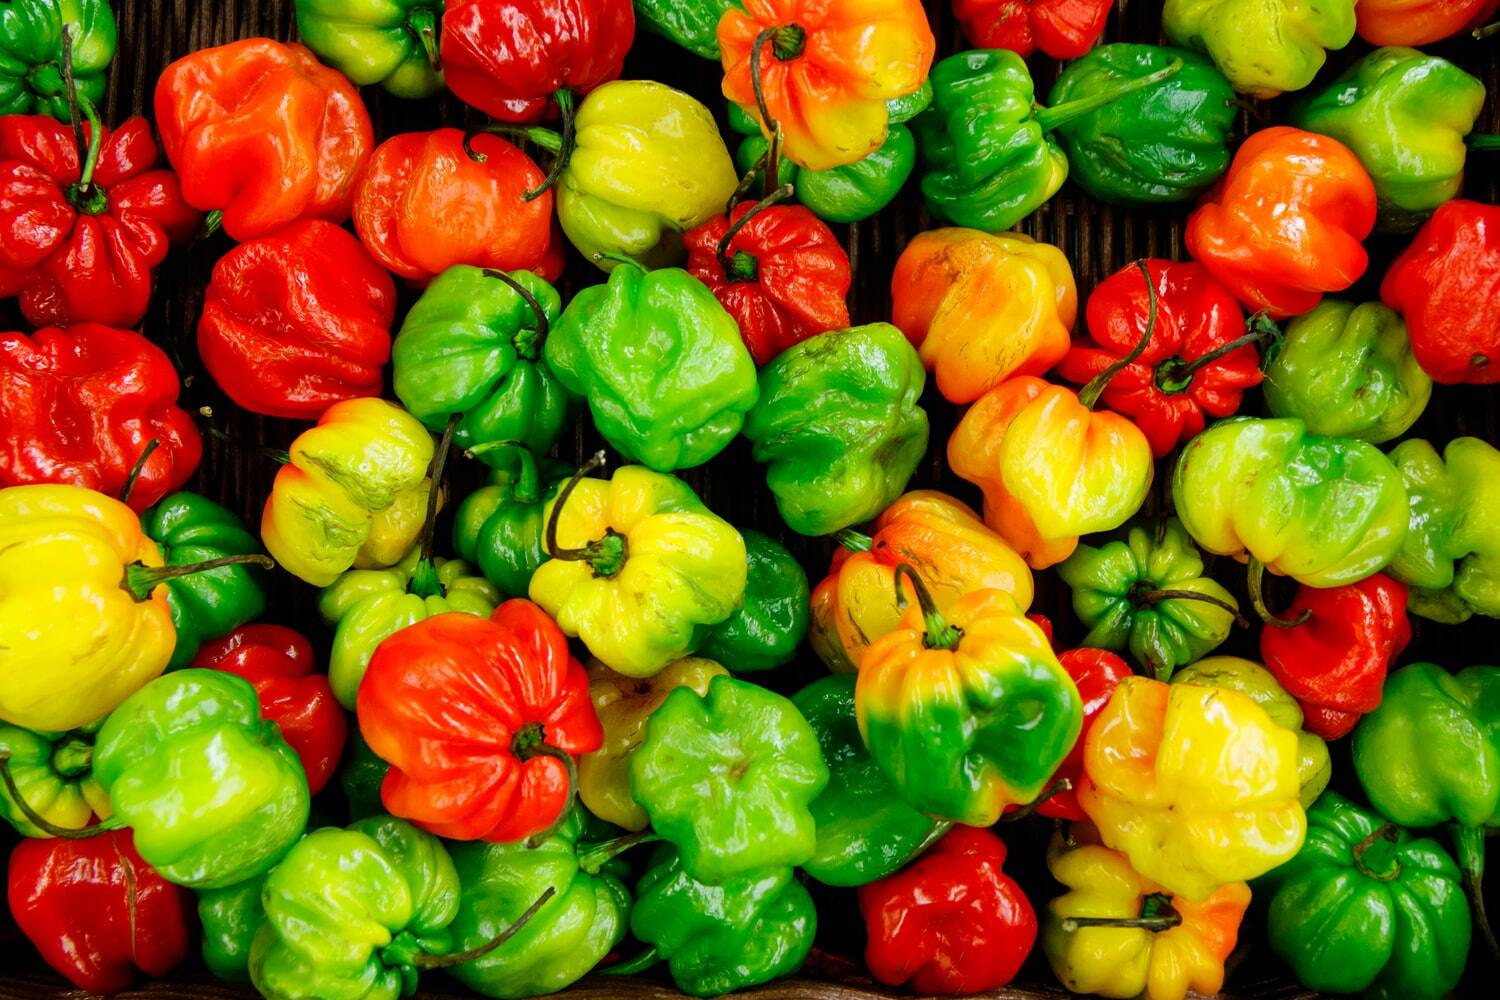 Red, green, orange, and yellow chili peppers, the ingredient used to make spicy food worldwide. 